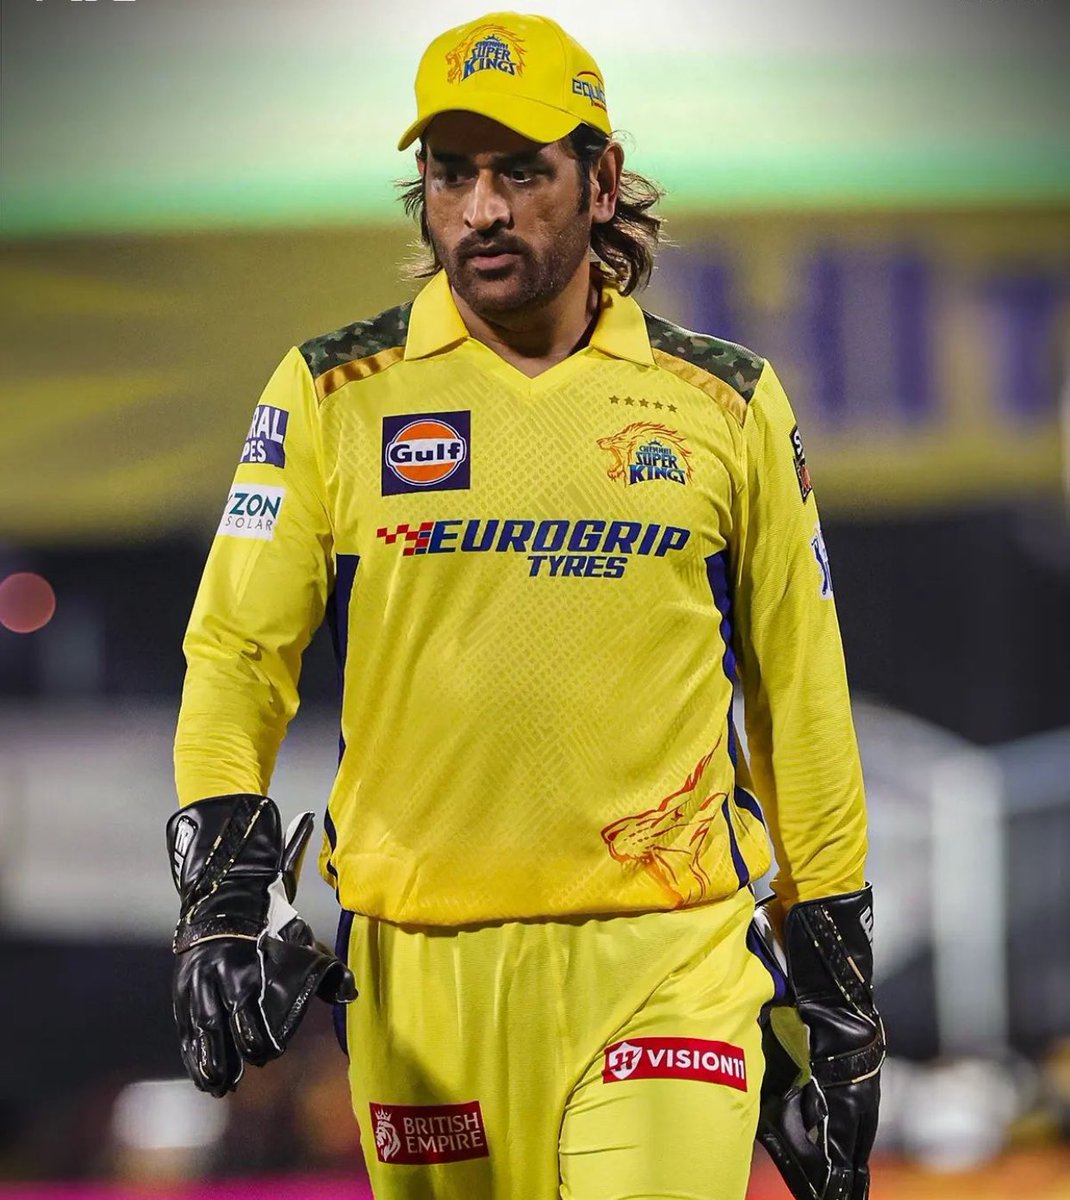 First Wicketkeeper to complete 300 dismissals in T20 cricket. #Dhoni